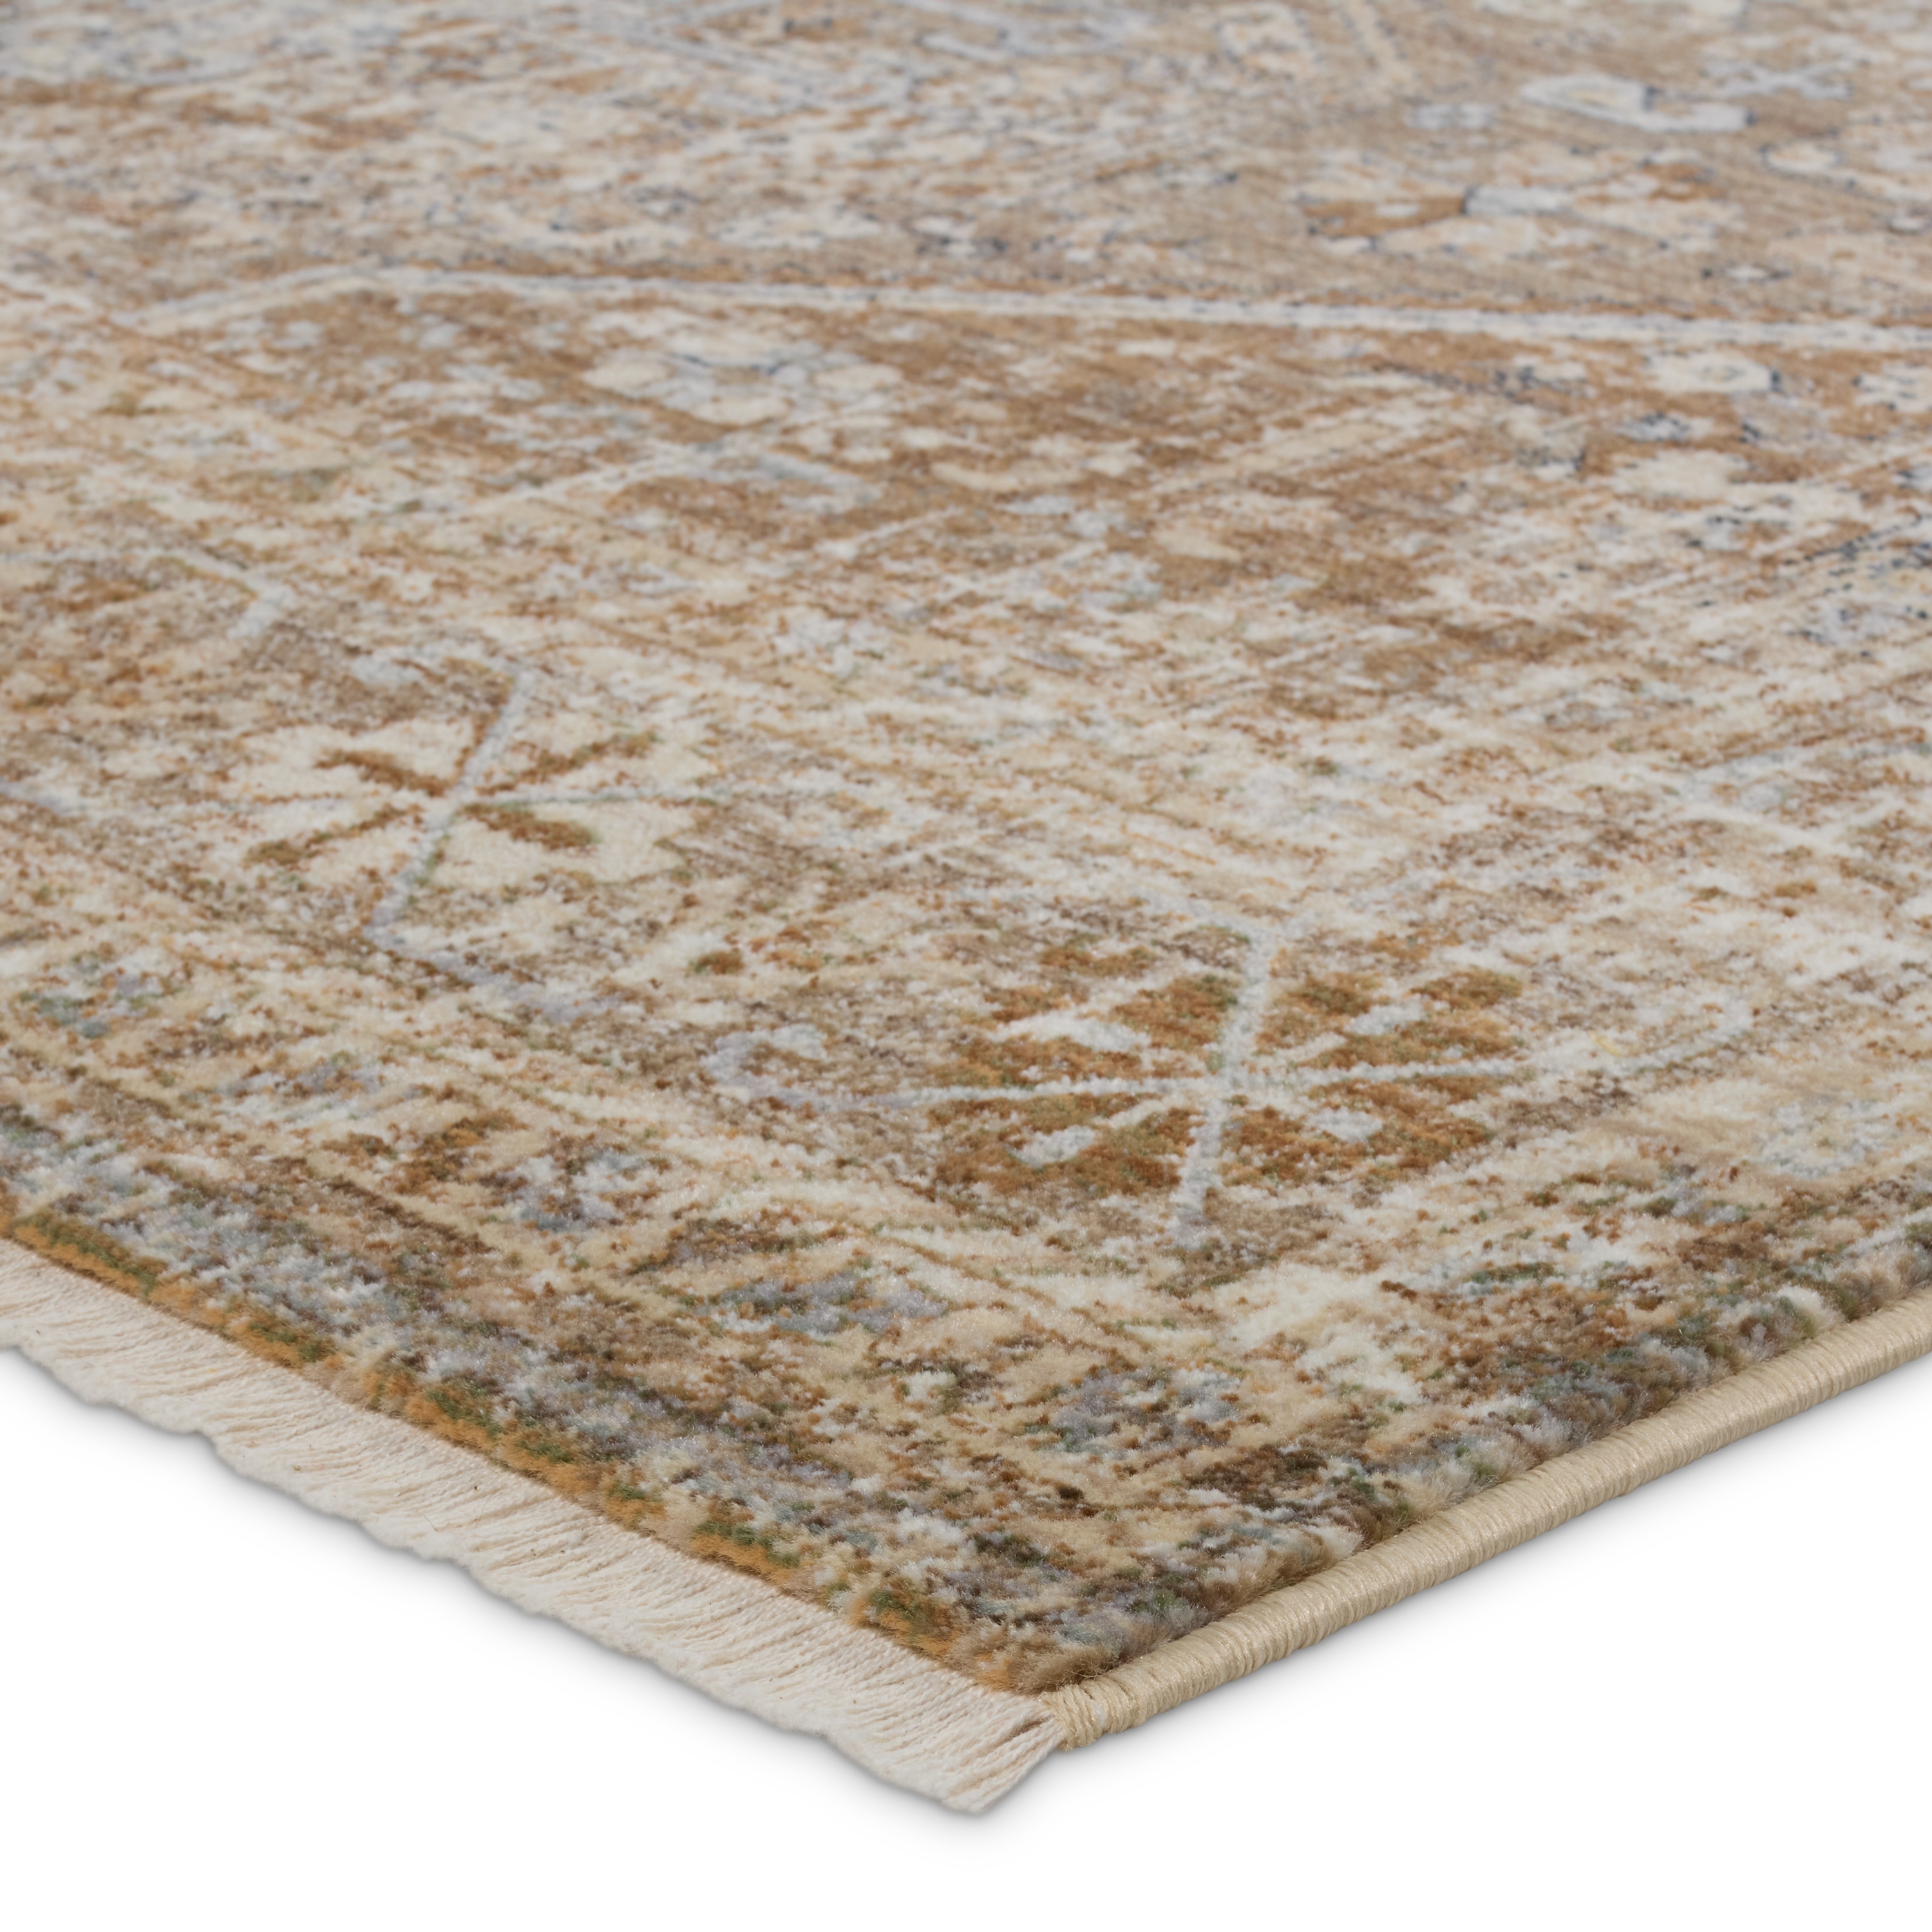 Vibe by Zakaria Medallion Tan/Taupe Area Rug (5'X8') - Image 1